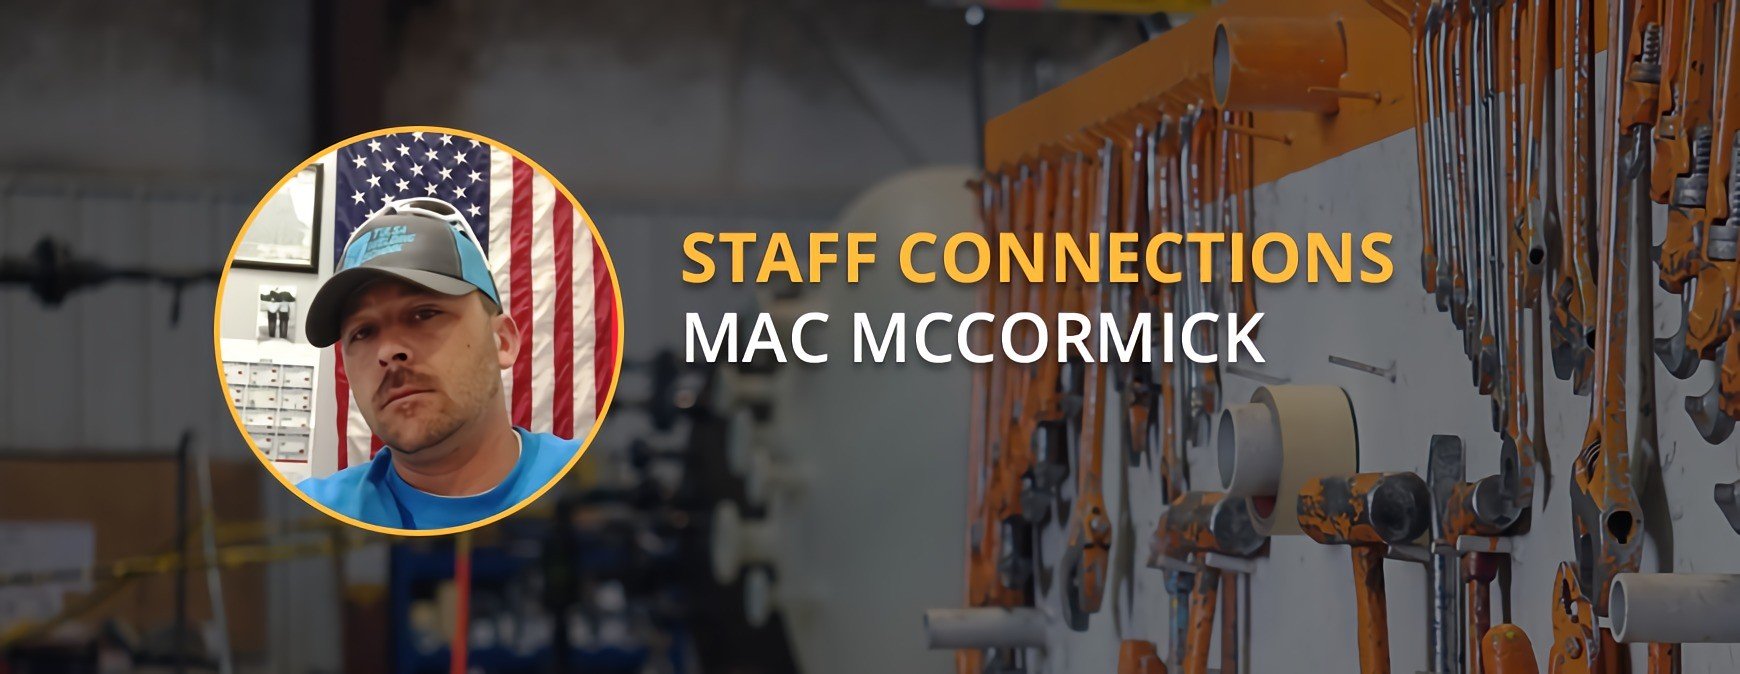 mac mccormick staff connections